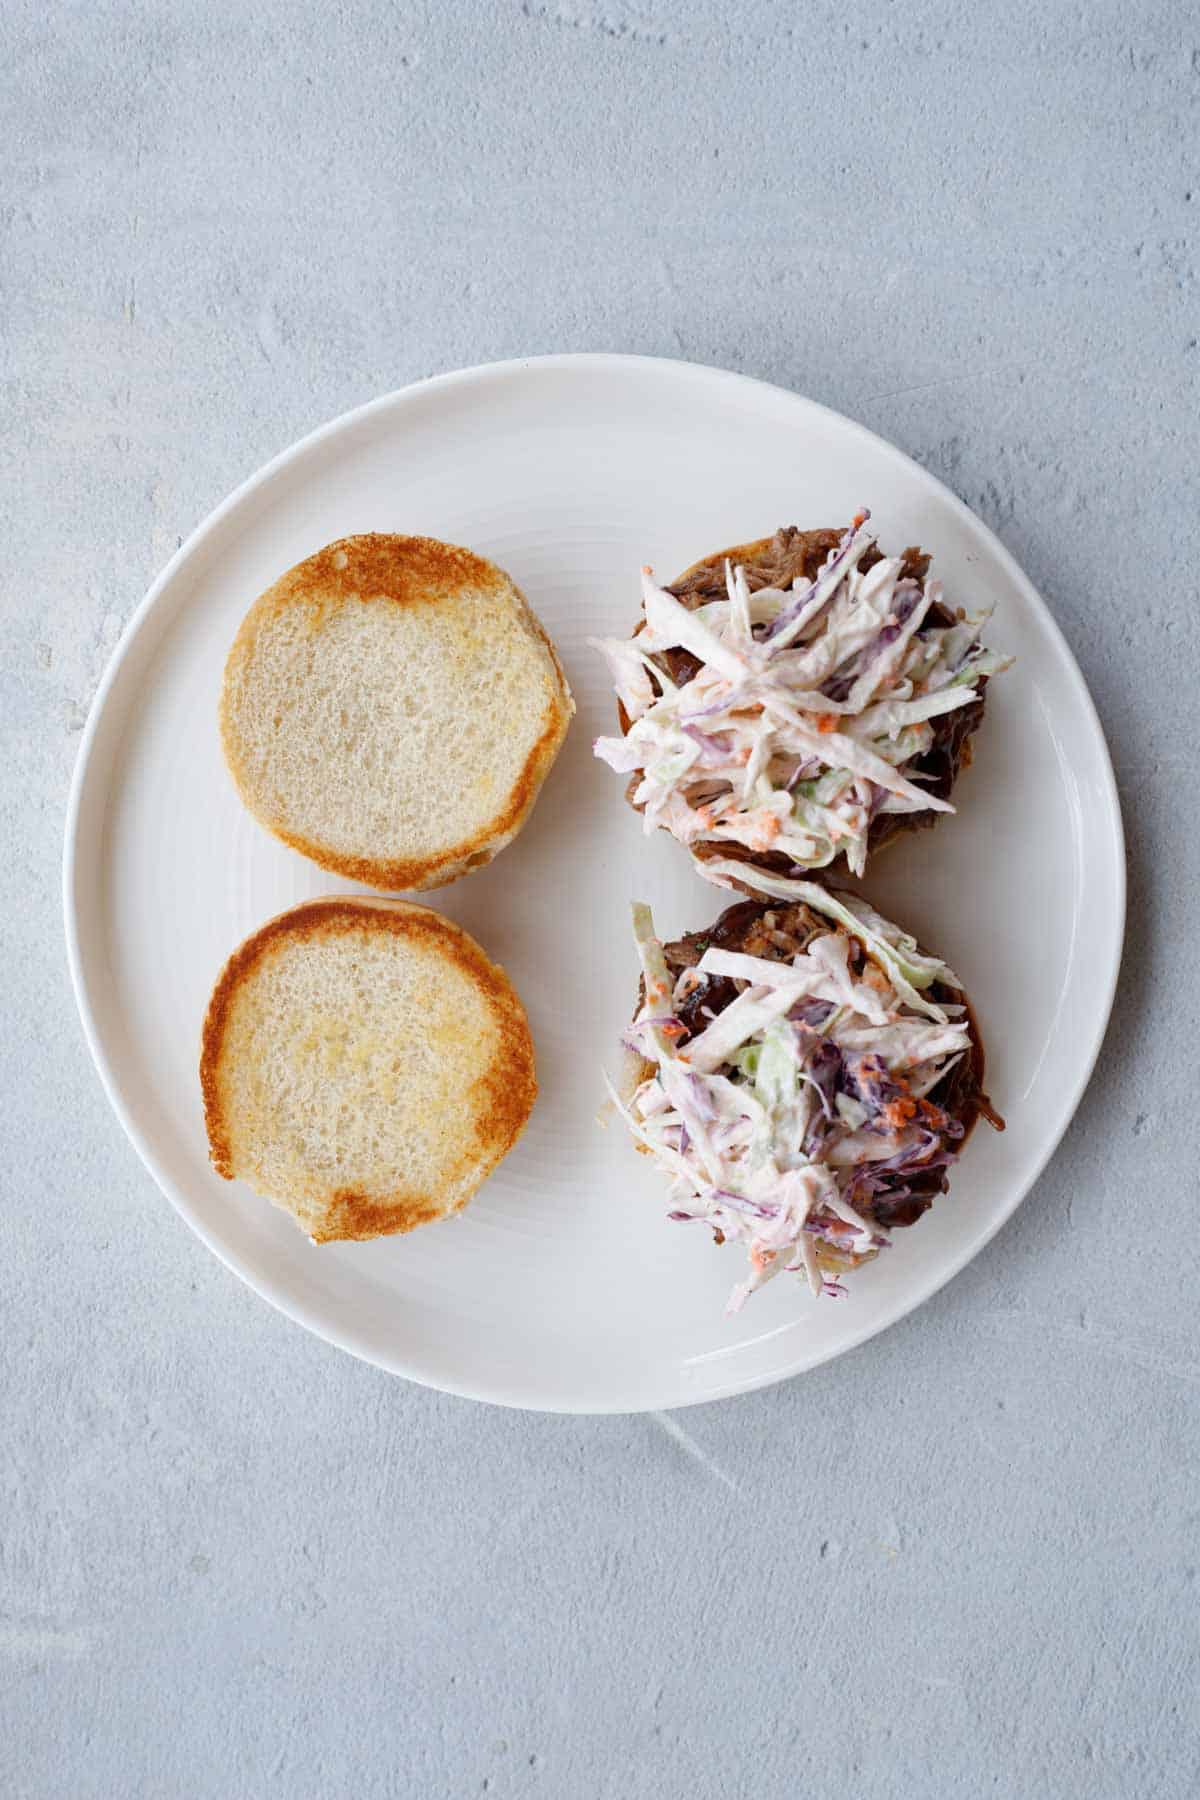 The assembled sandwiches with the coleslaw on top. 